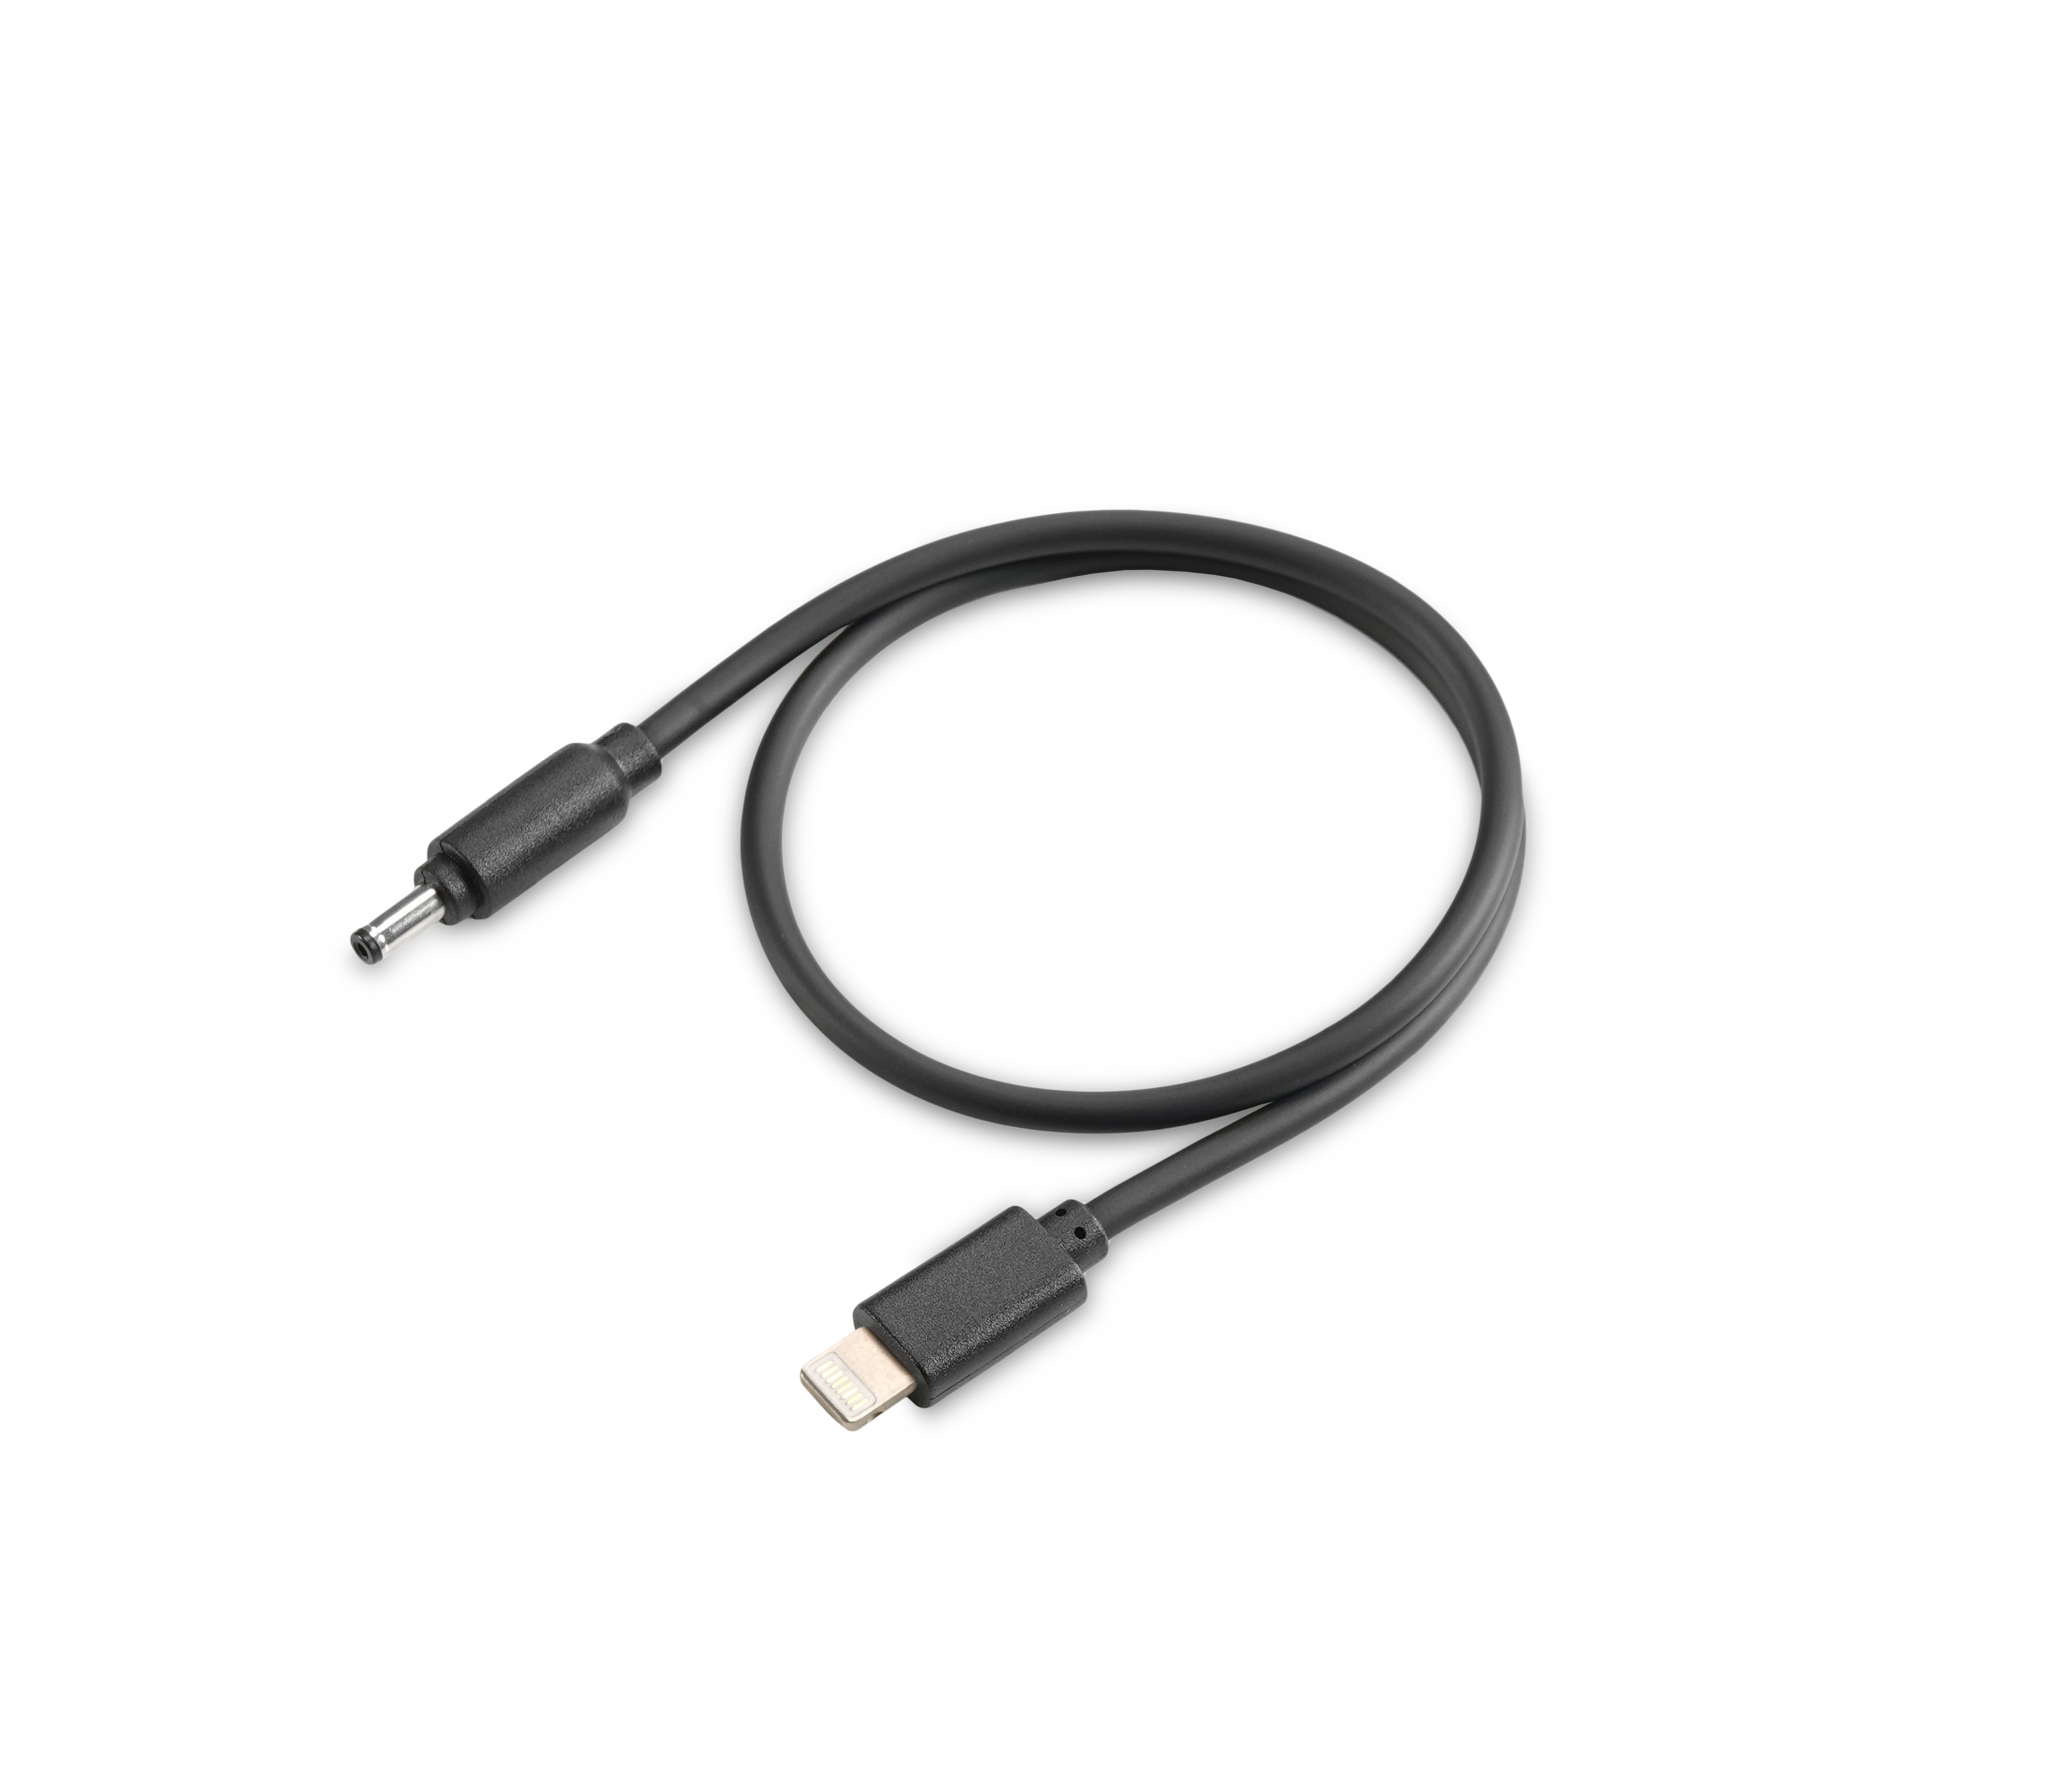 Cable for USB TWO